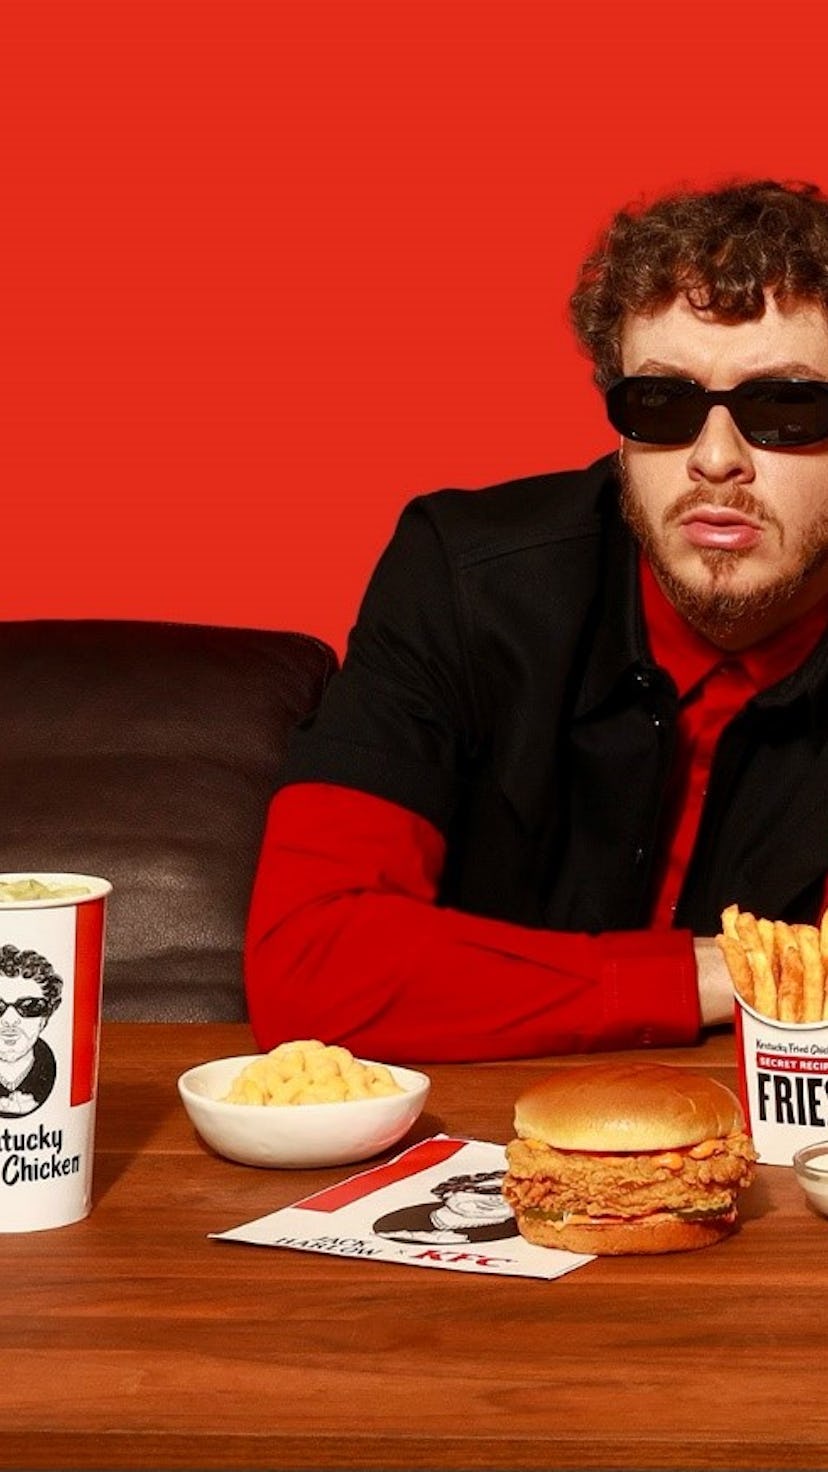 KFC is releasing a Jack Harlow Meal this summer.